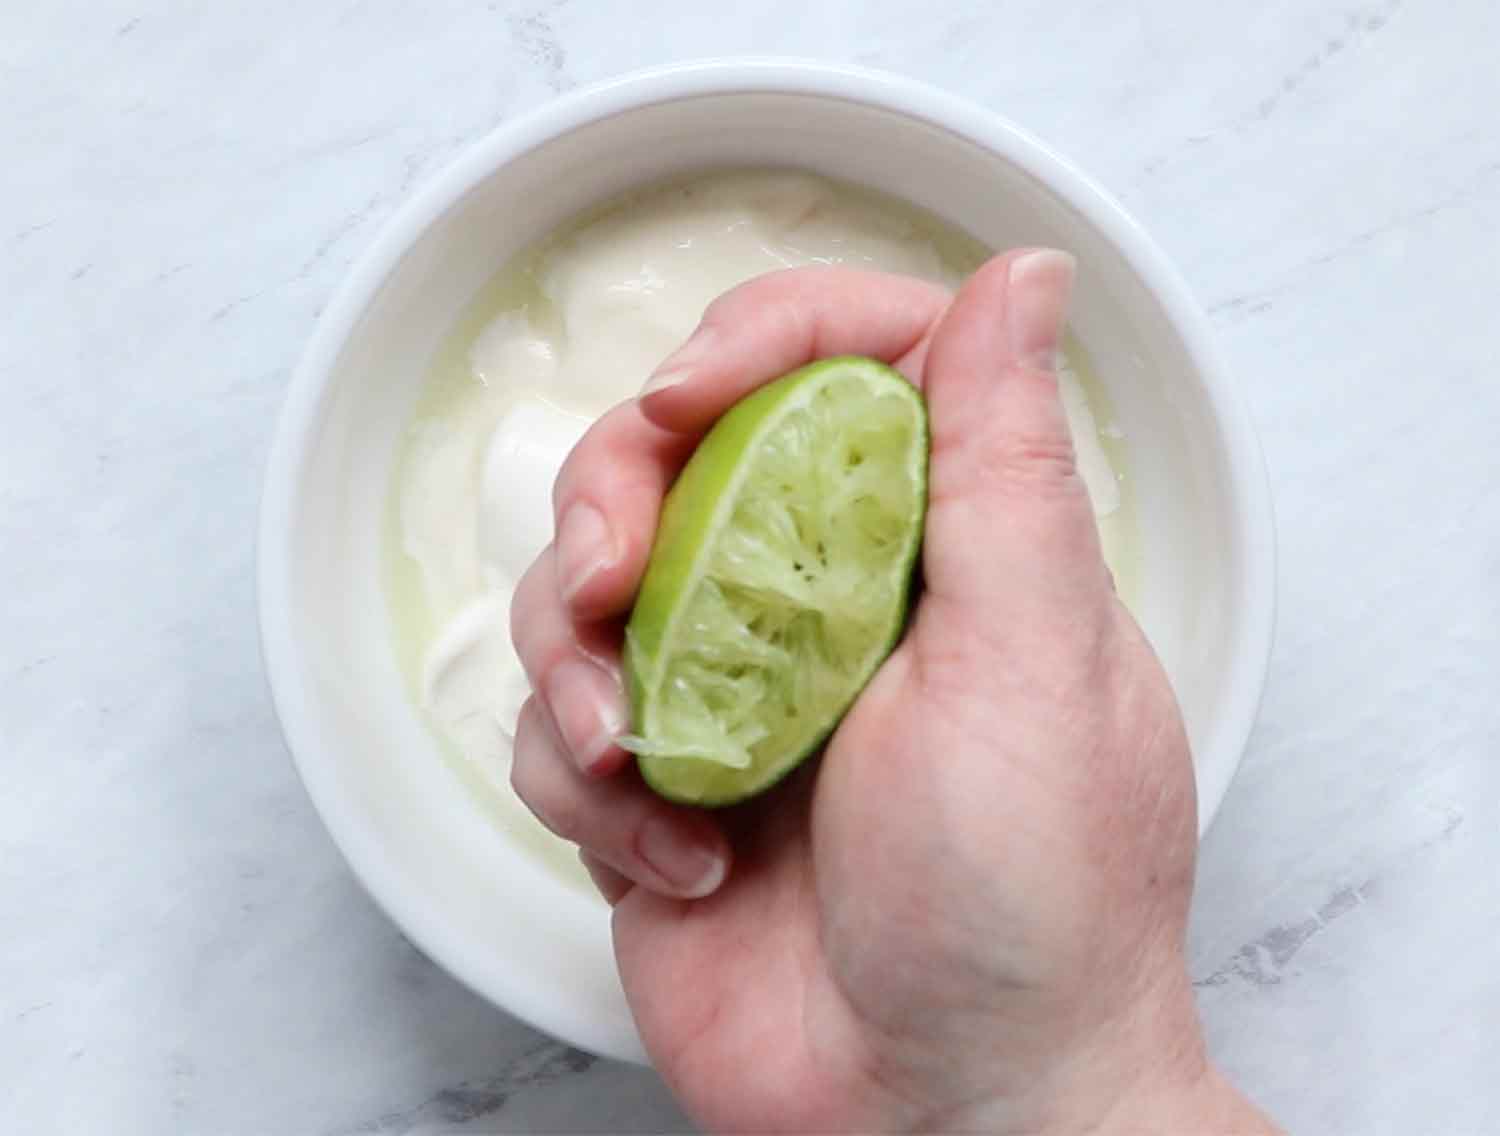 Step 2: thin the sauce by adding the juice of half of a lime.